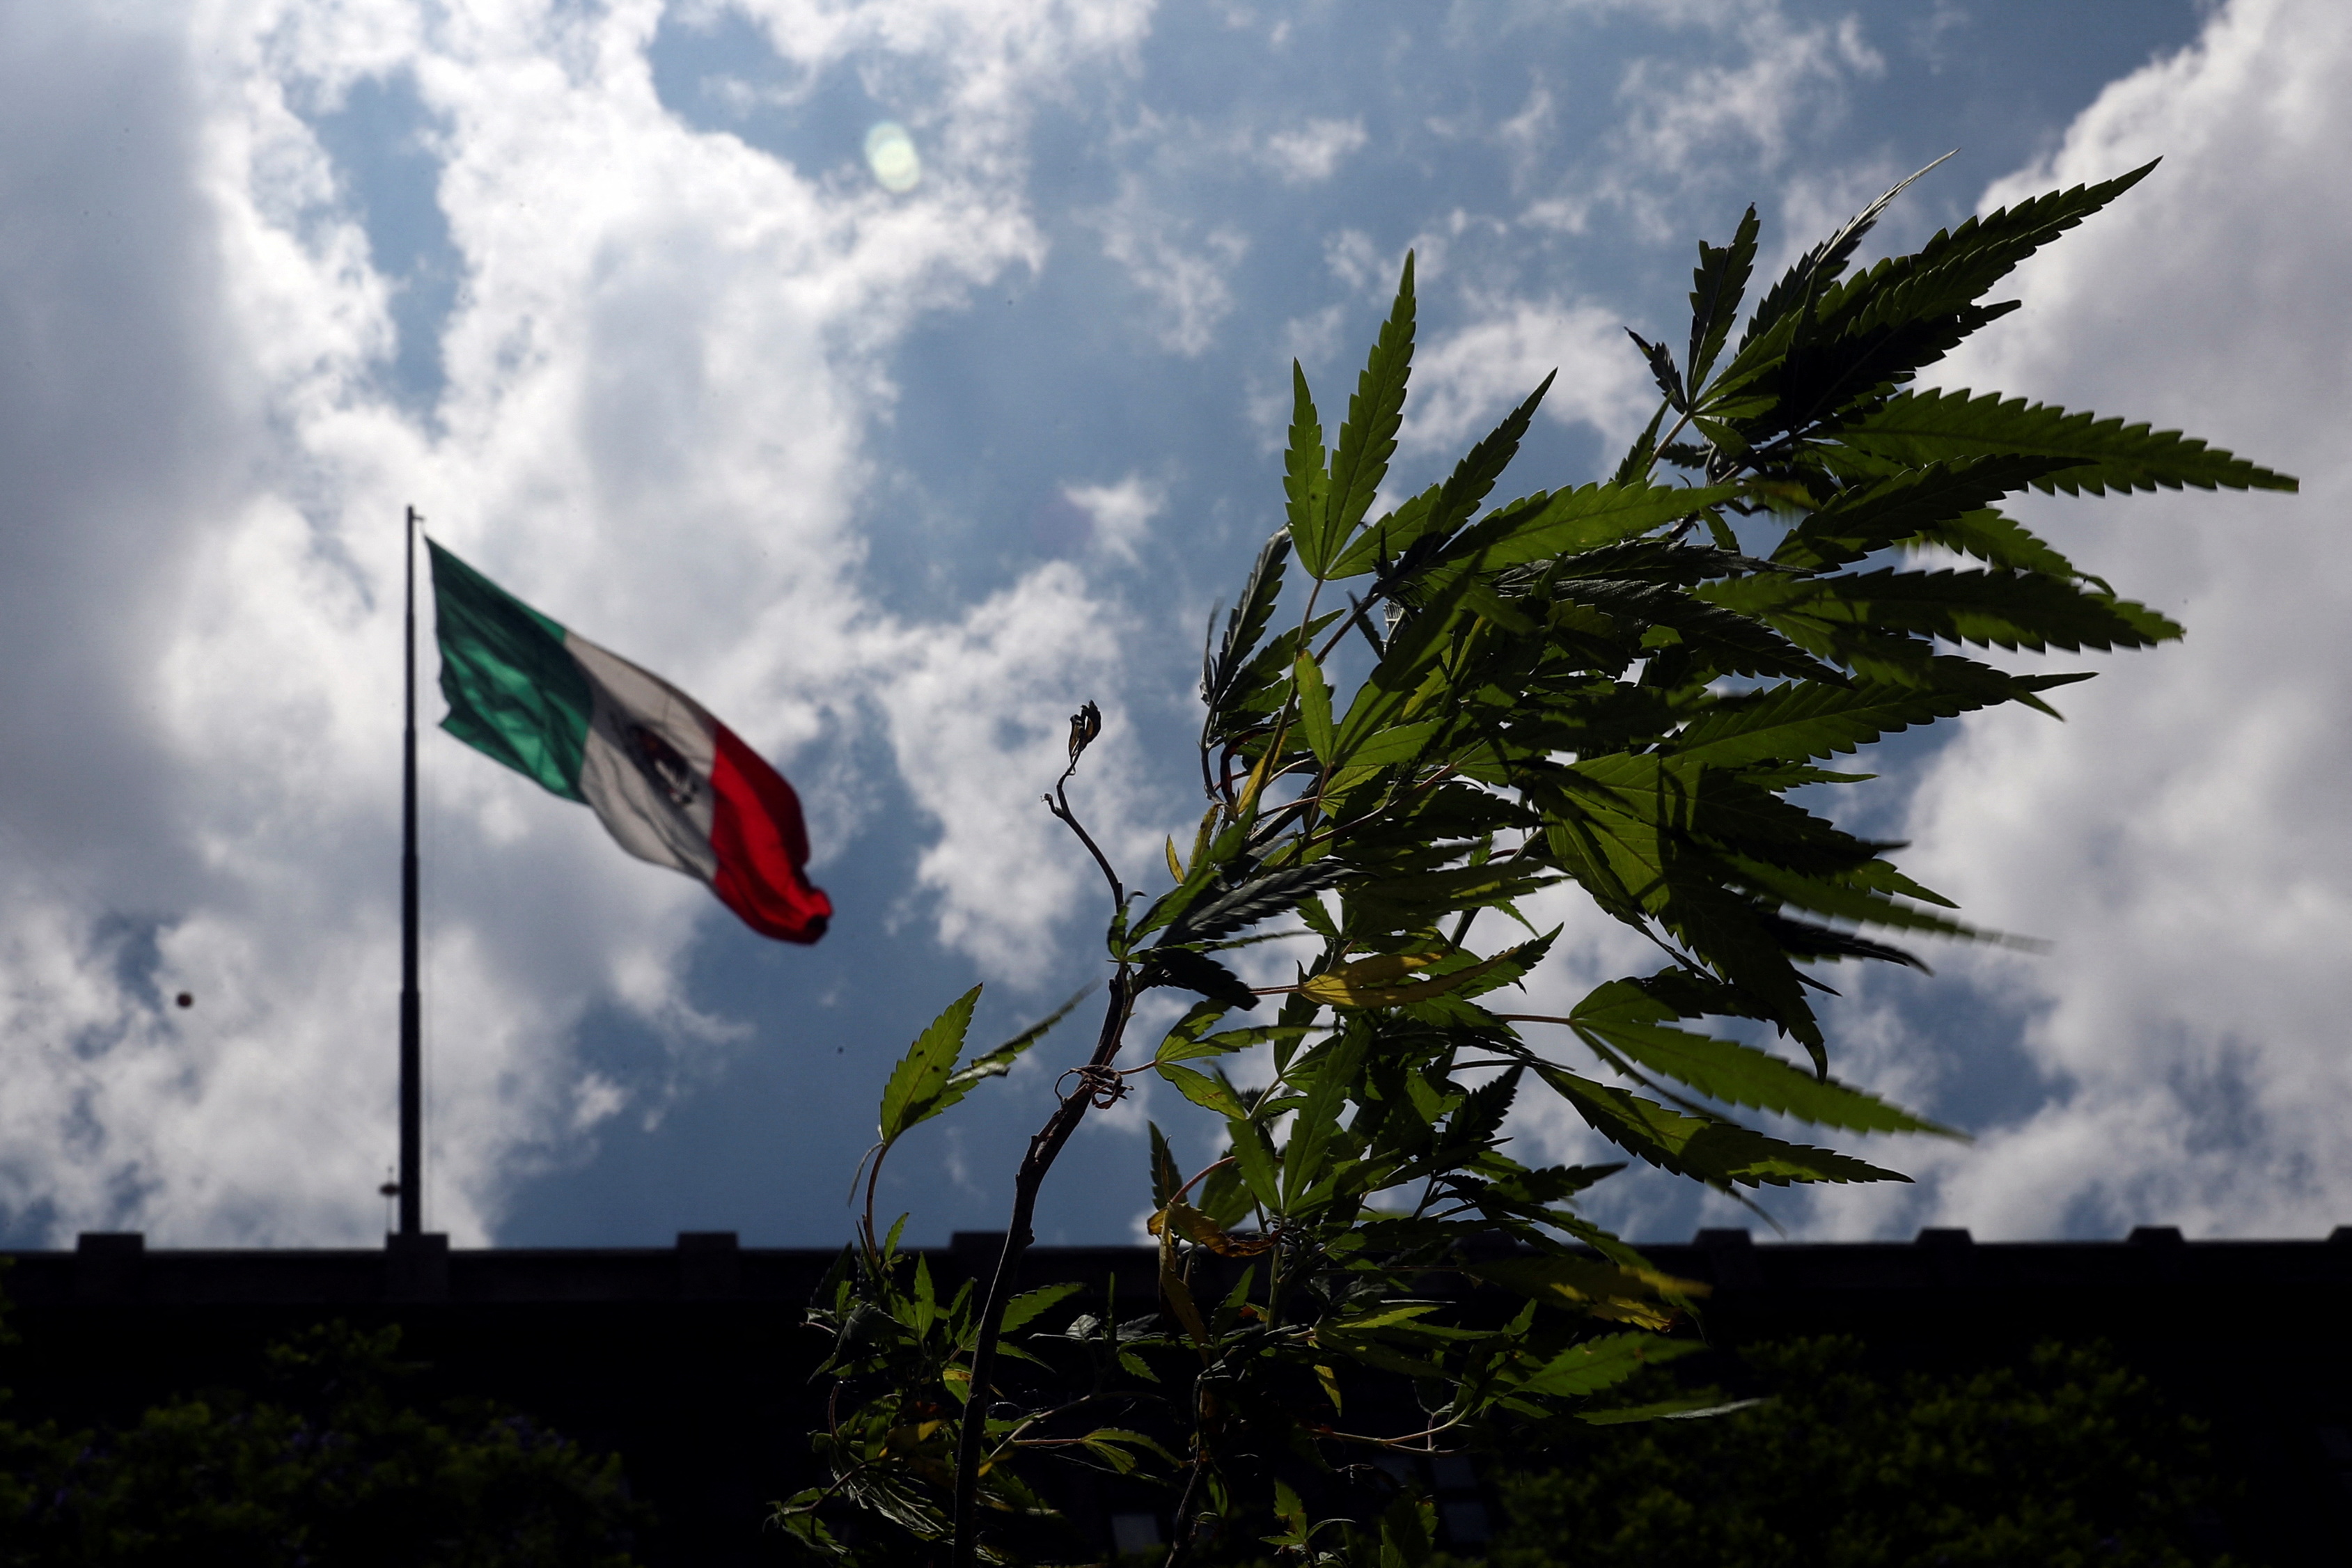 A marijuana plant is pictured near a flag of Mexico during a demonstration in support of the free possession of cannabis without the purpose of sale, outside the Supreme Court building in Mexico City, Mexico, May 11, 2022. REUTERS/Edgard Garrido